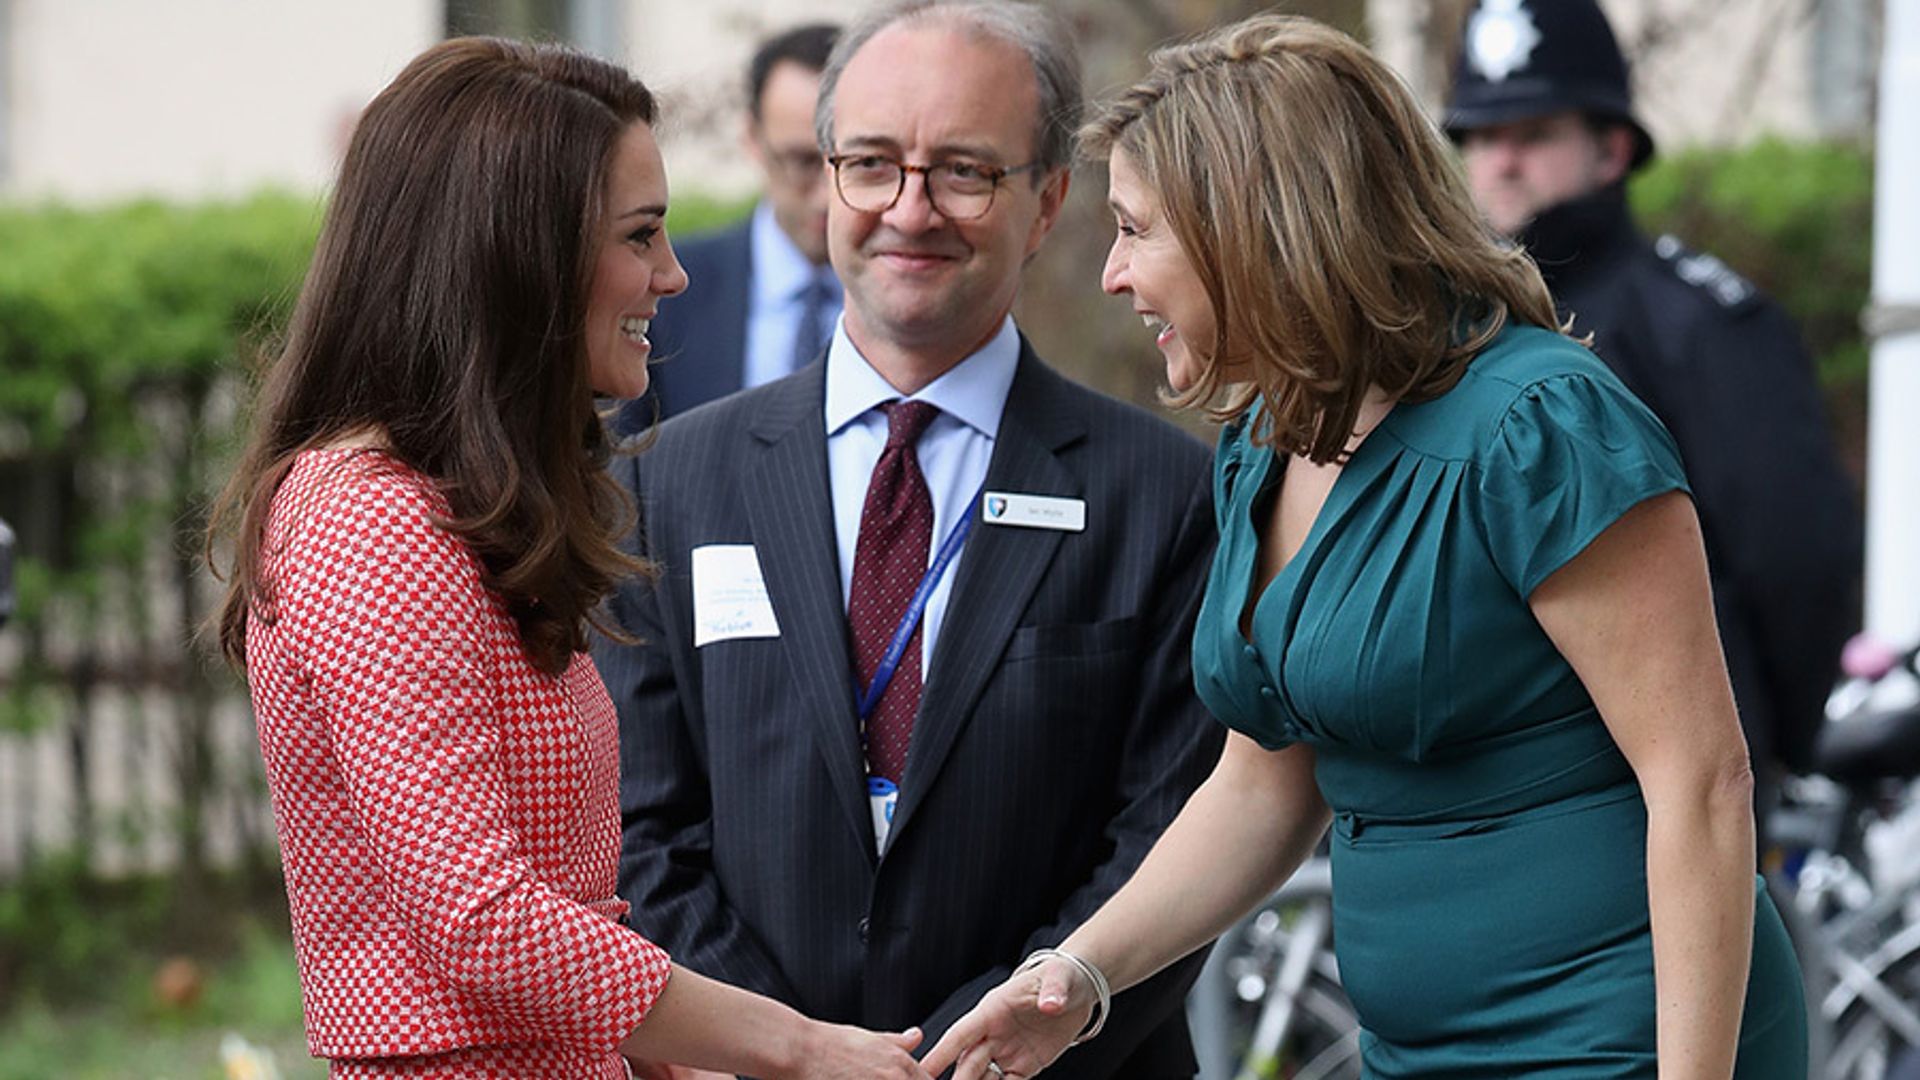 Kate Middleton appears at London engagement day after terror attack